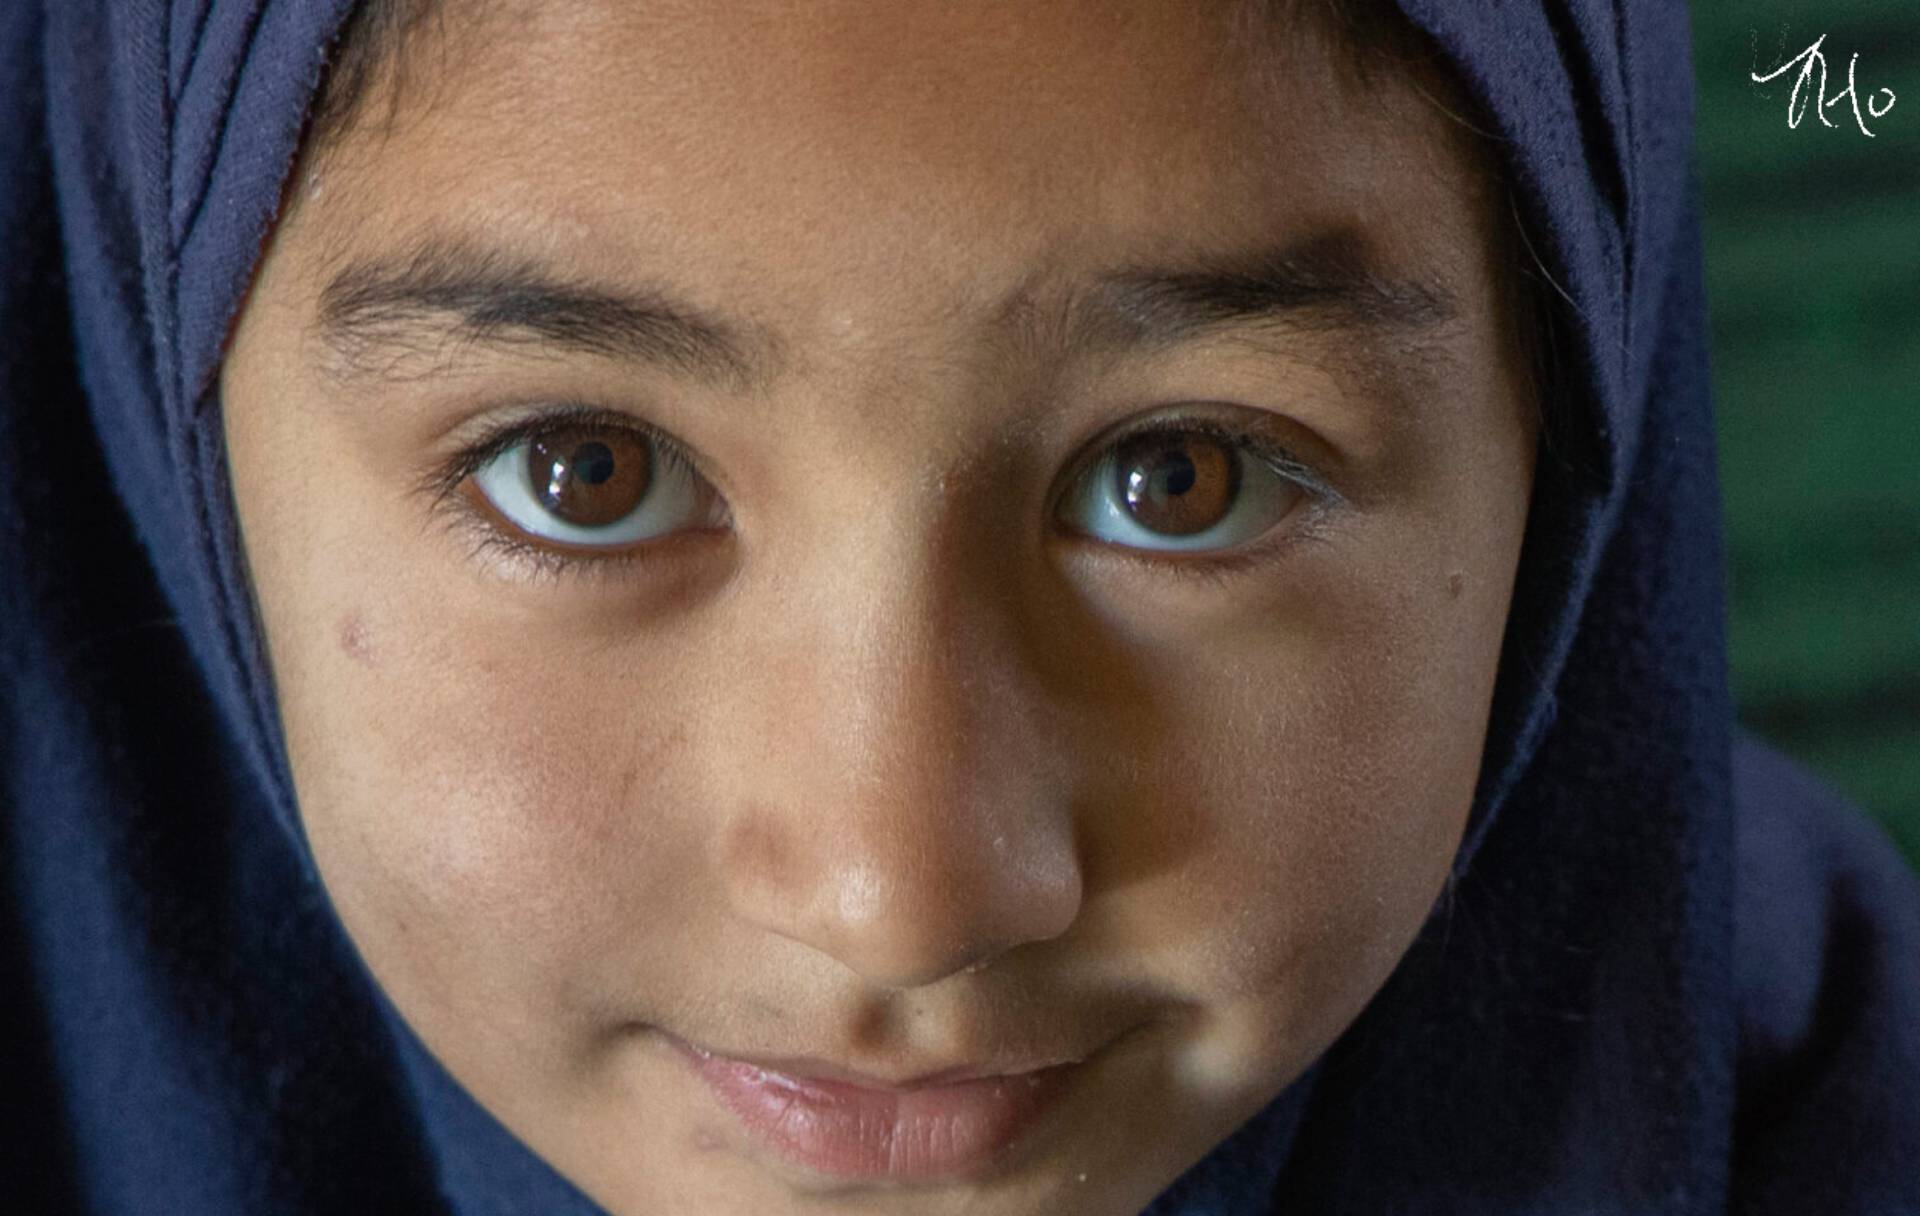 A young girl wearing a hijab is looking at the camera.